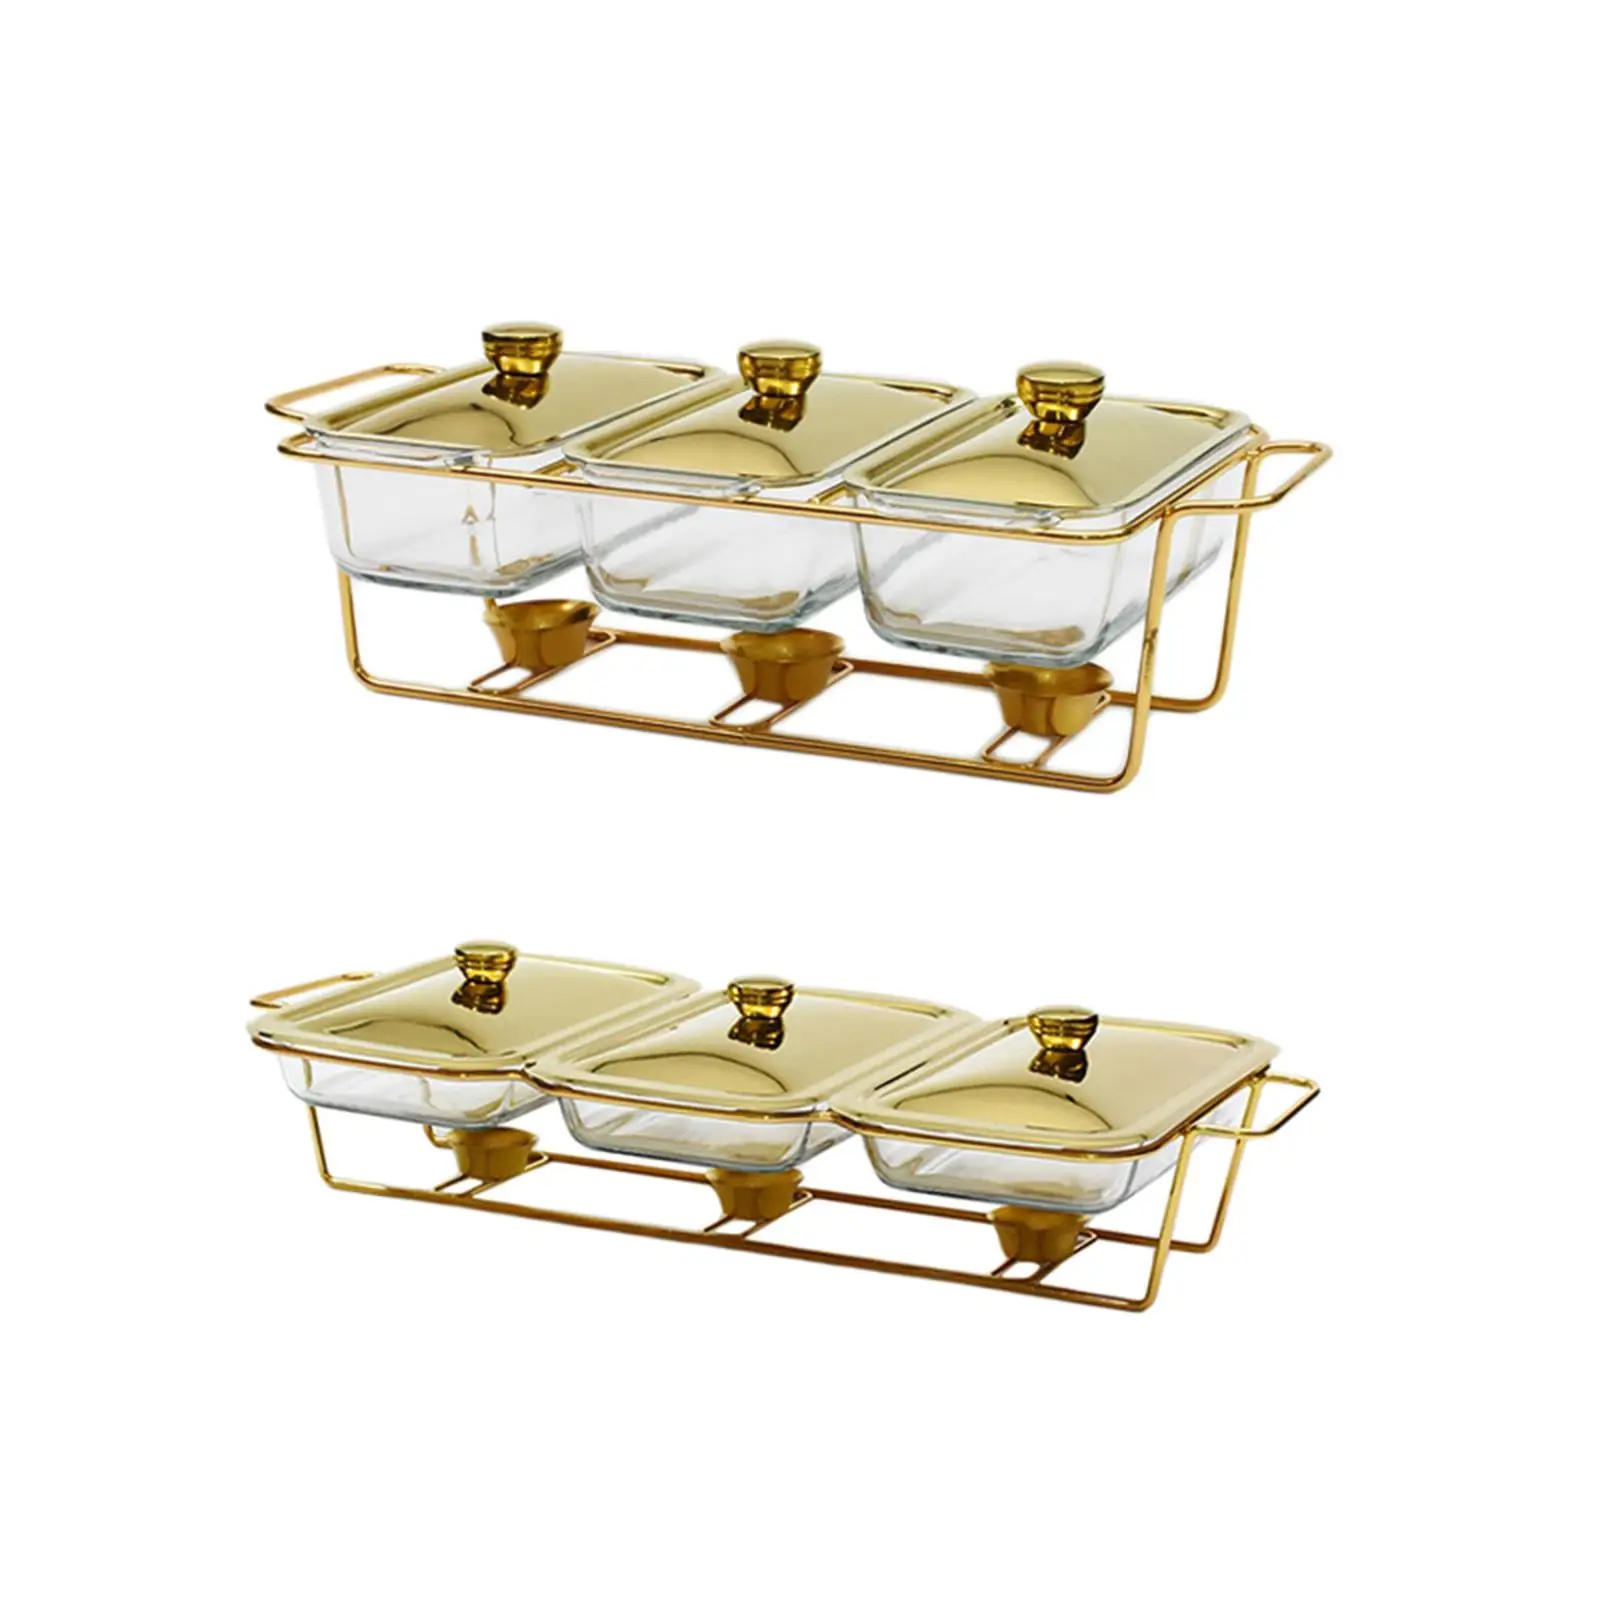 Food Warmers Trays 3 Grids 1.3L/1.5L Chafing Dish Buffet Set Stable Serving Dish Buffet Food Warmer Pot for party Wedding